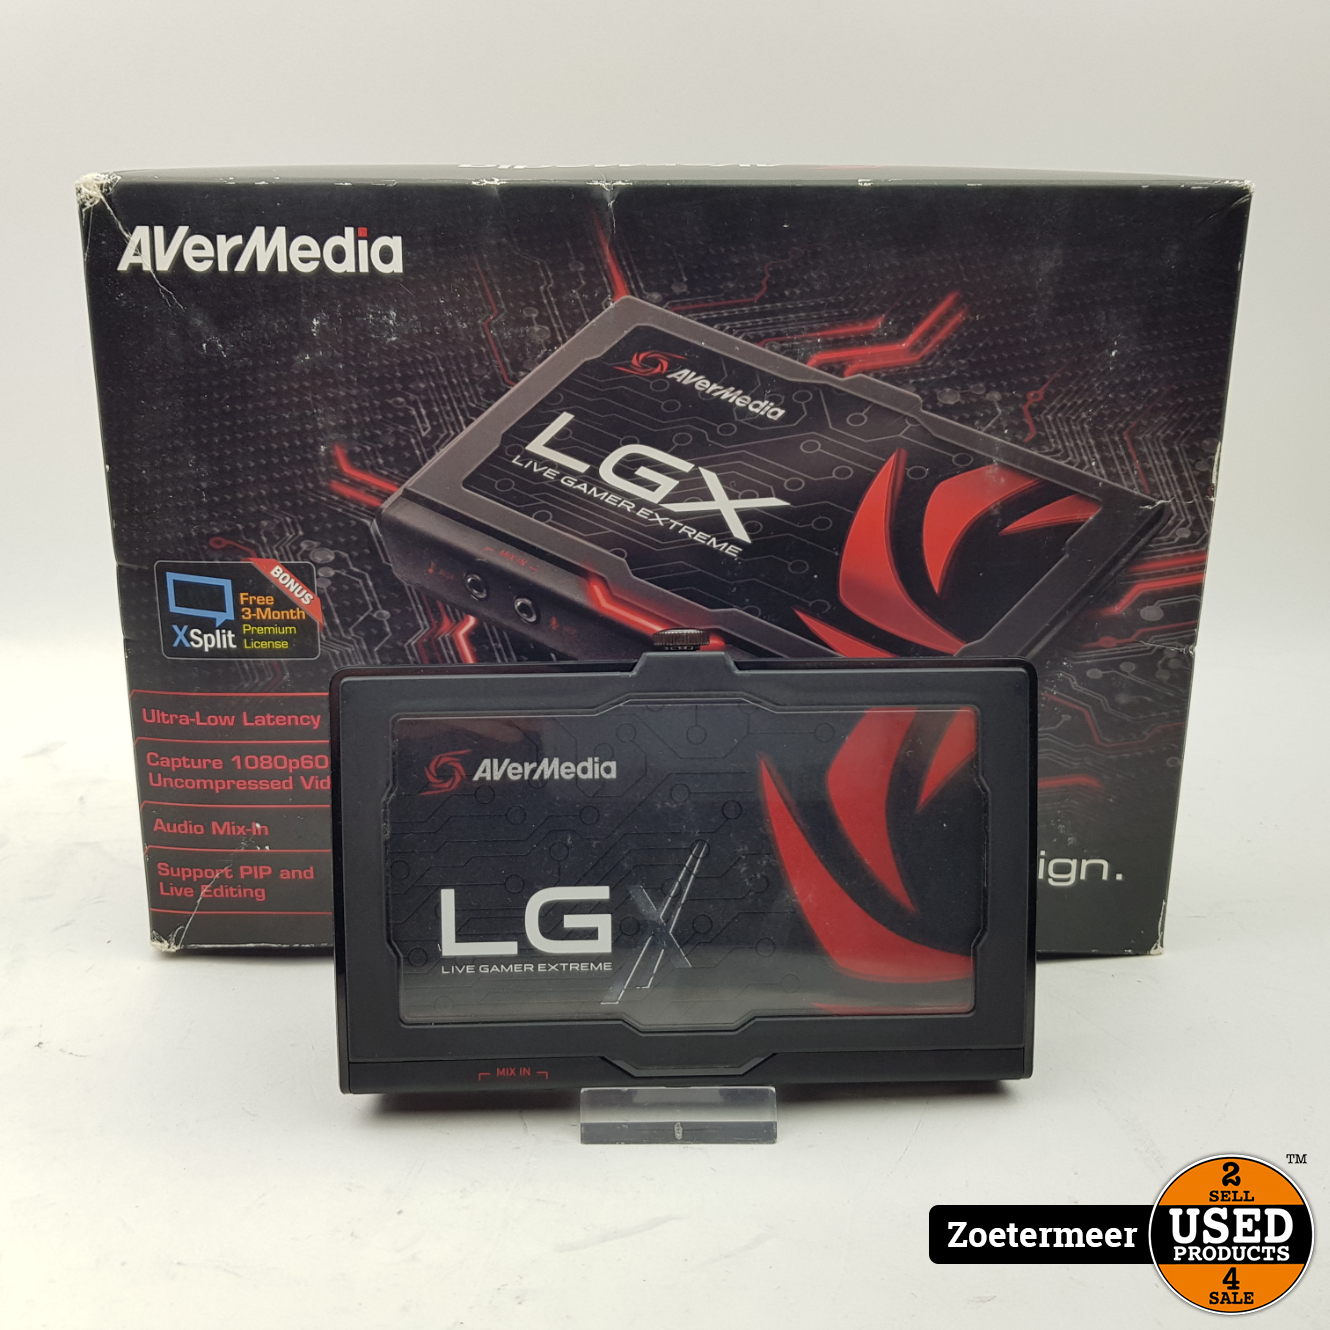 Lgx Live Gamer Extreme Gc550 Used Products Zoetermeer